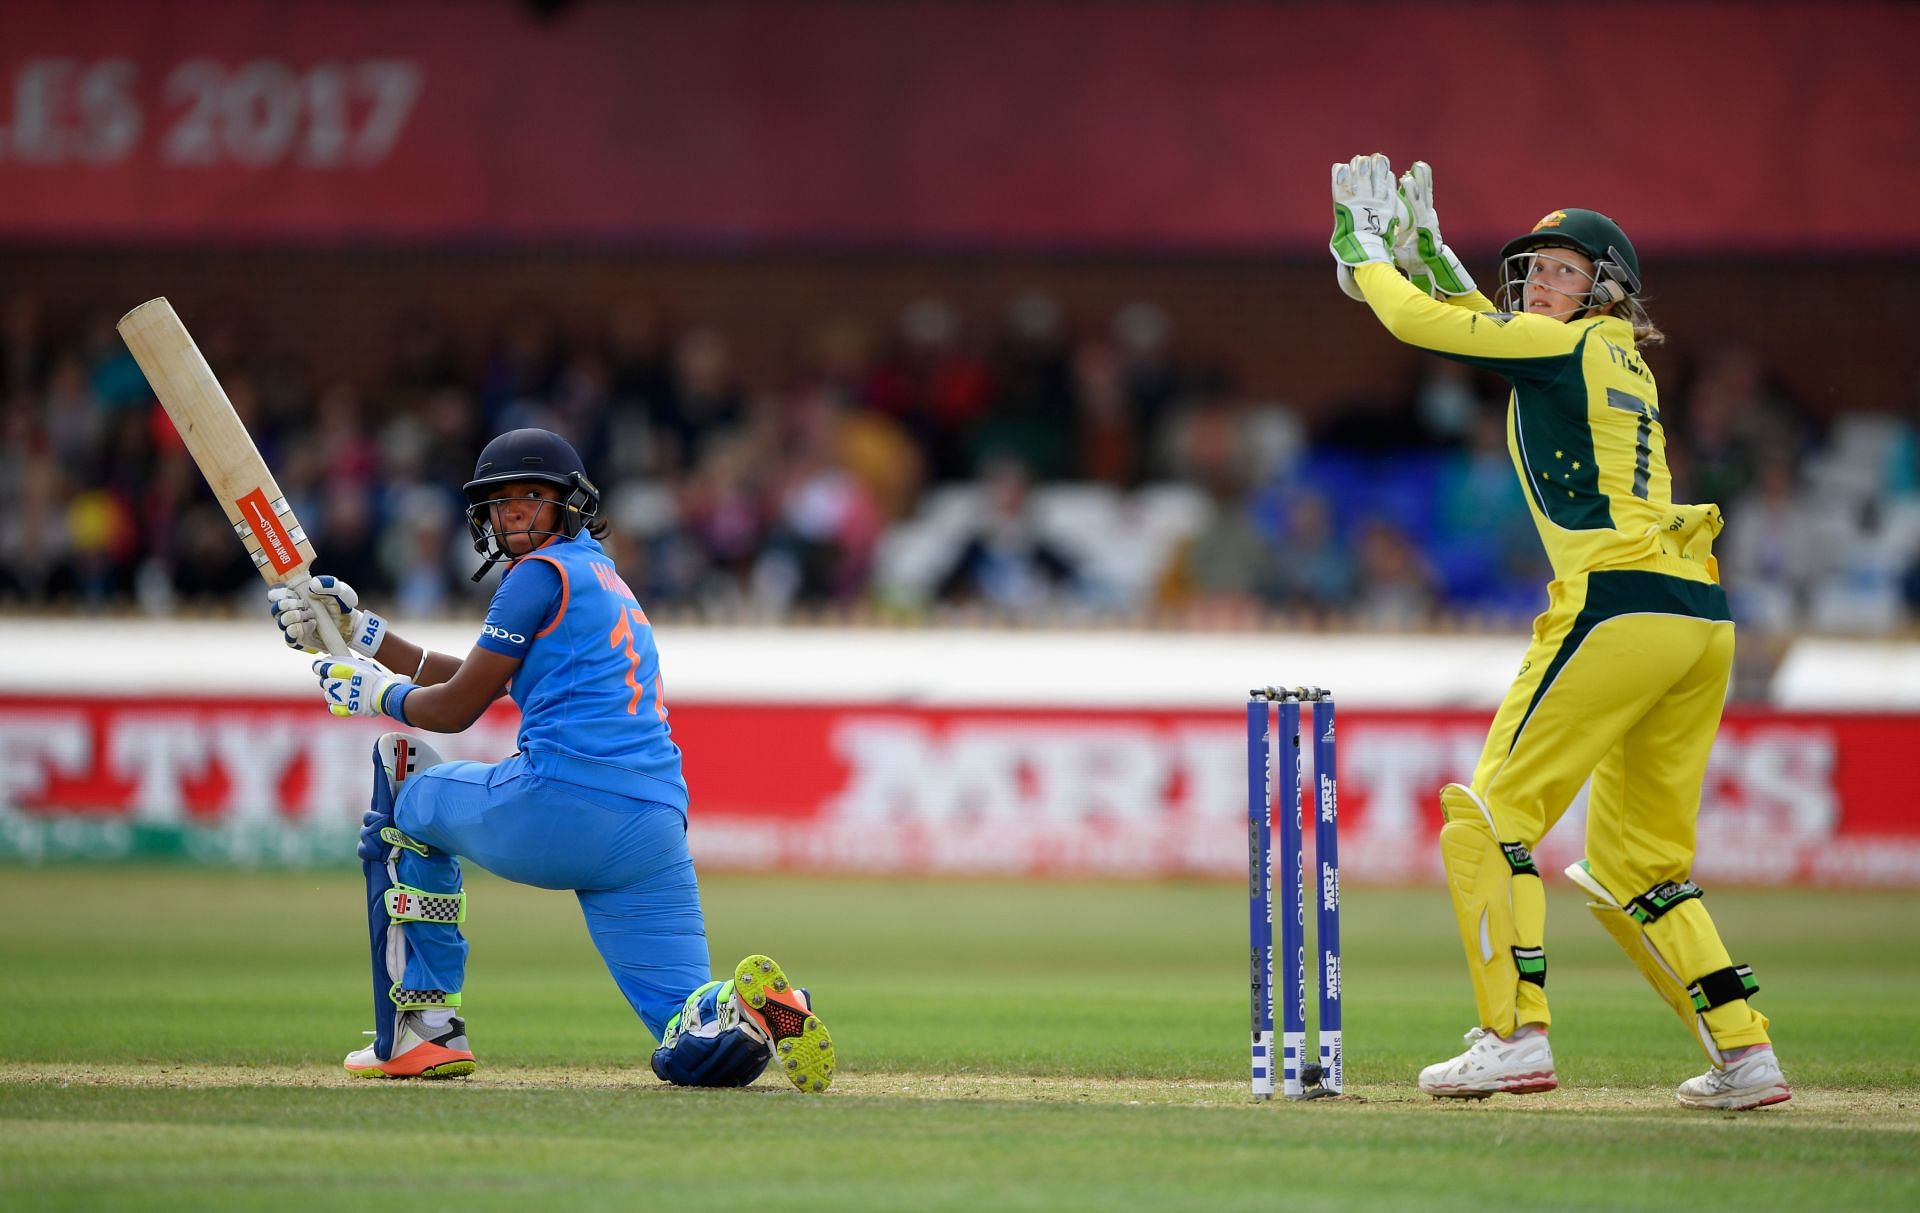 The star India Women&rsquo;s batter during her famous knock of 171*. Pic: Getty Images